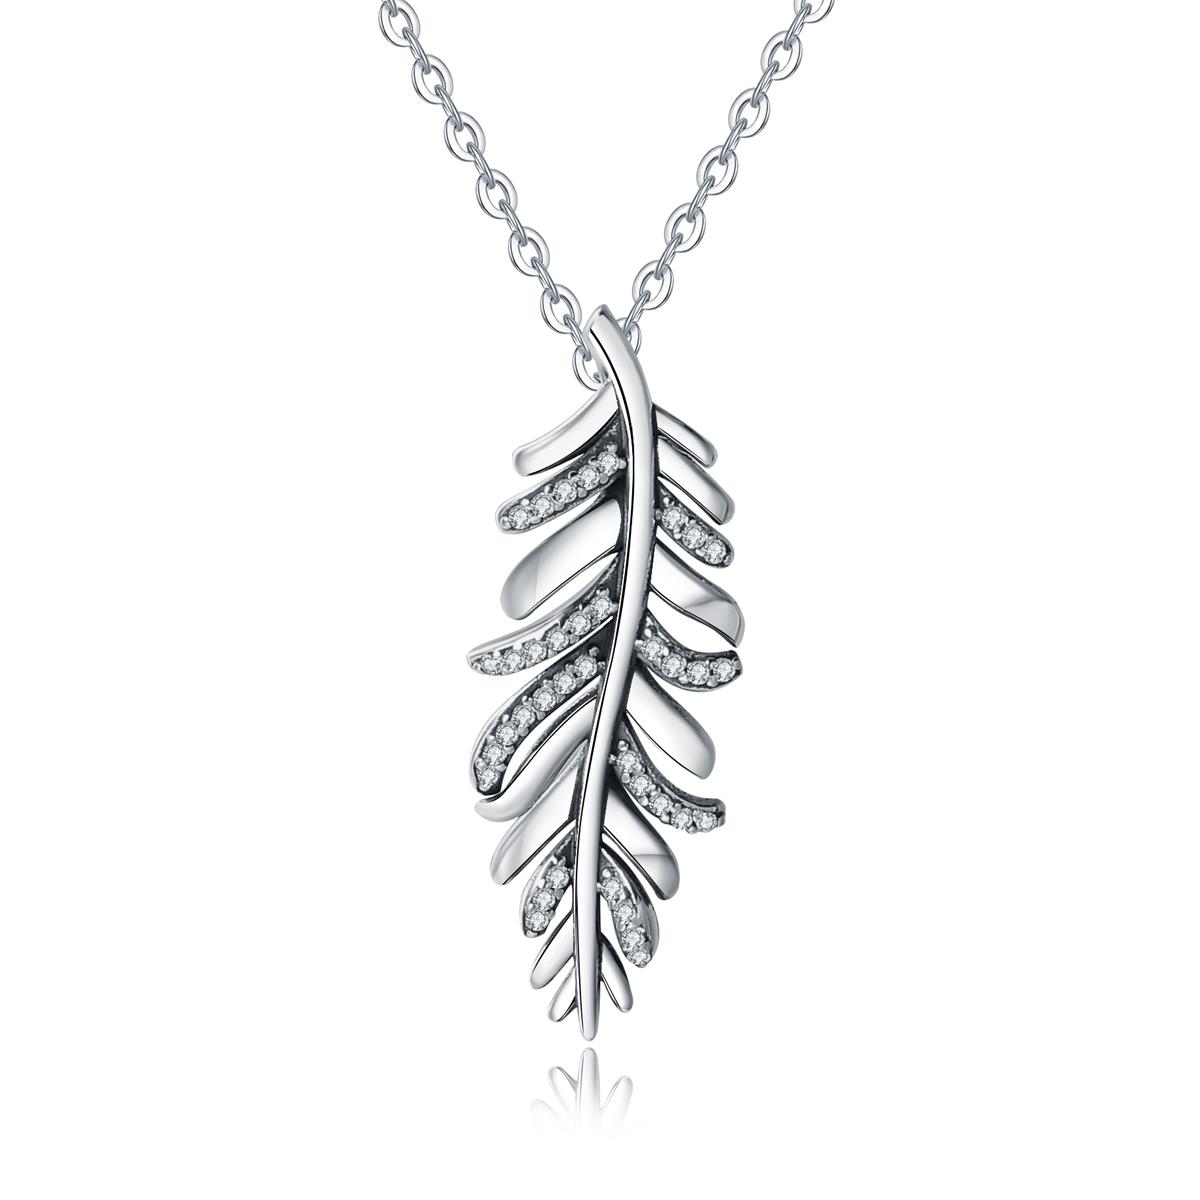 Merryshine Jewelry In Bulk Wholesale Price S925 Sterling Silver Feather Pendant Necklace